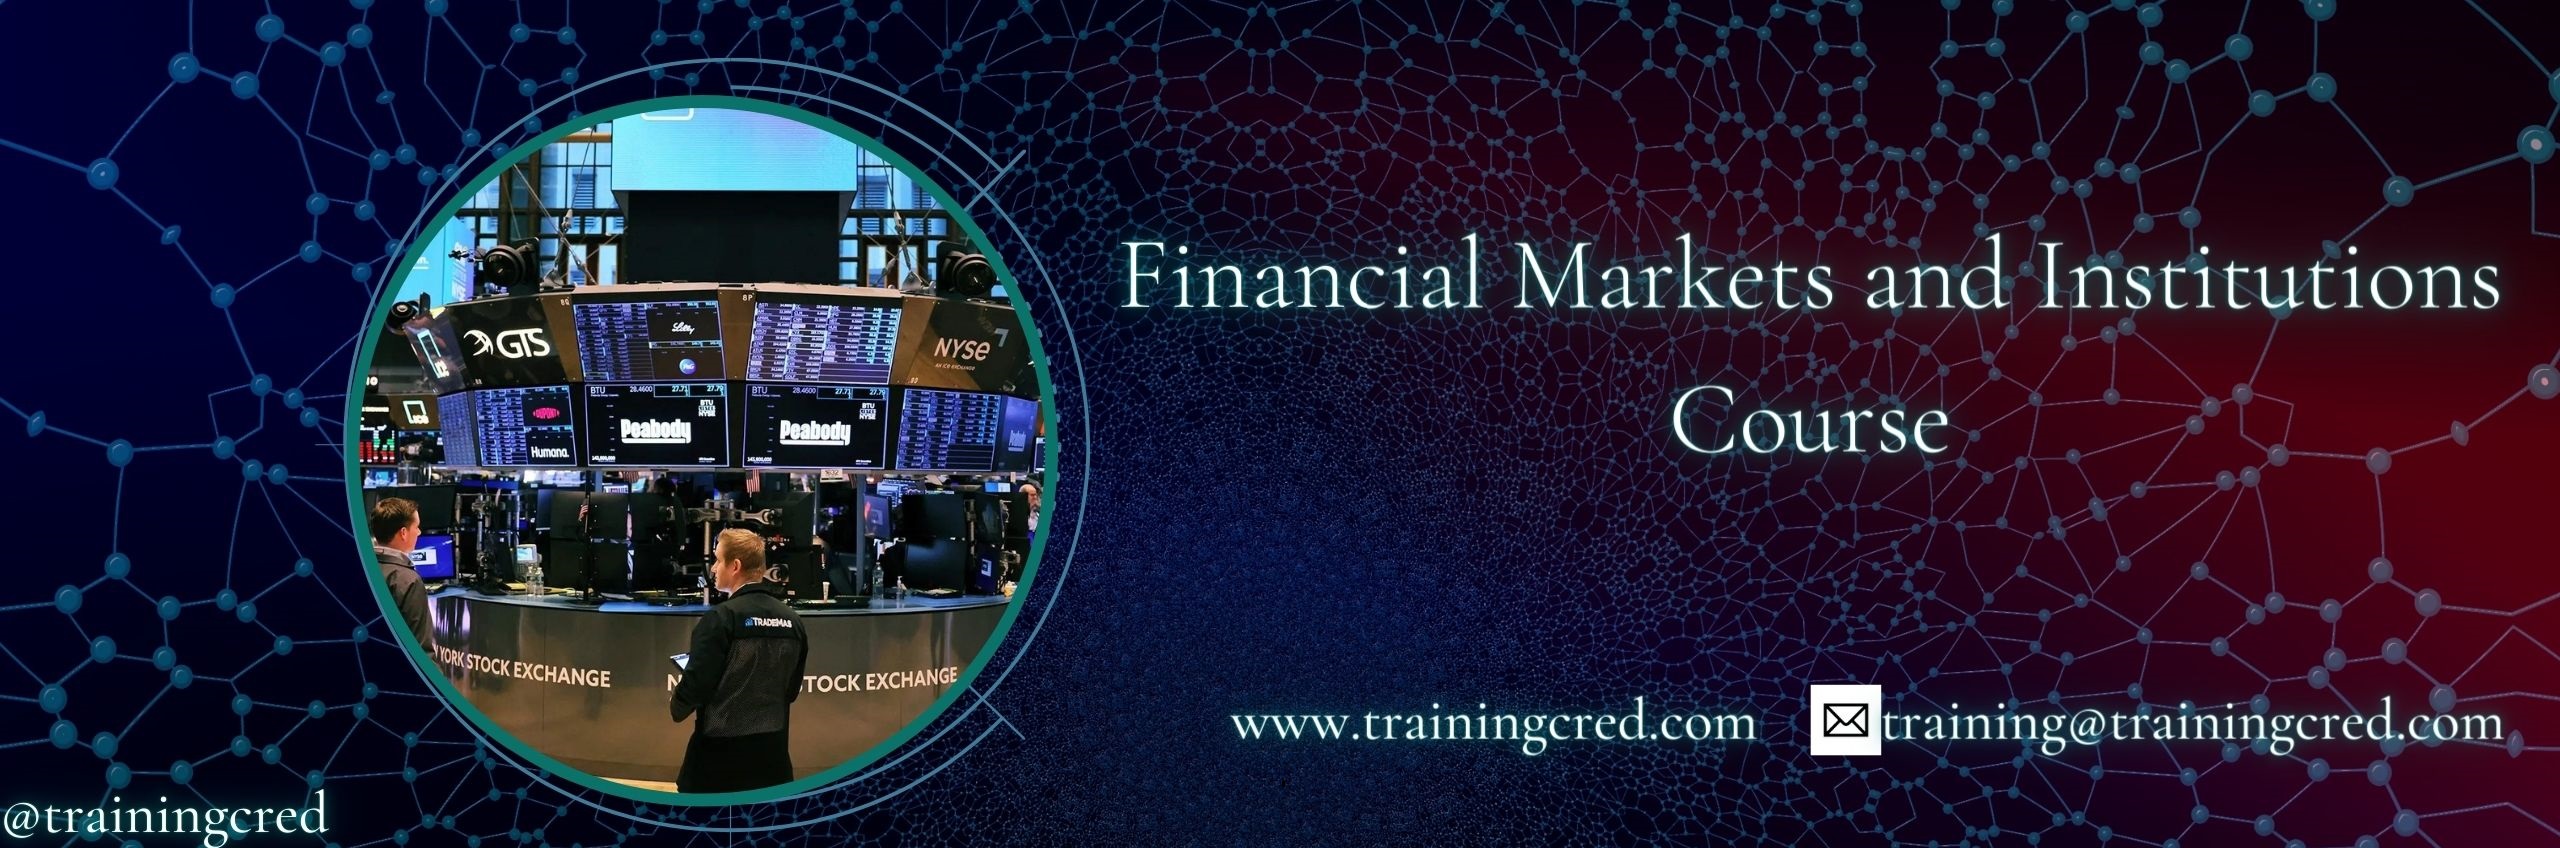 Financial Markets and Institutions Training